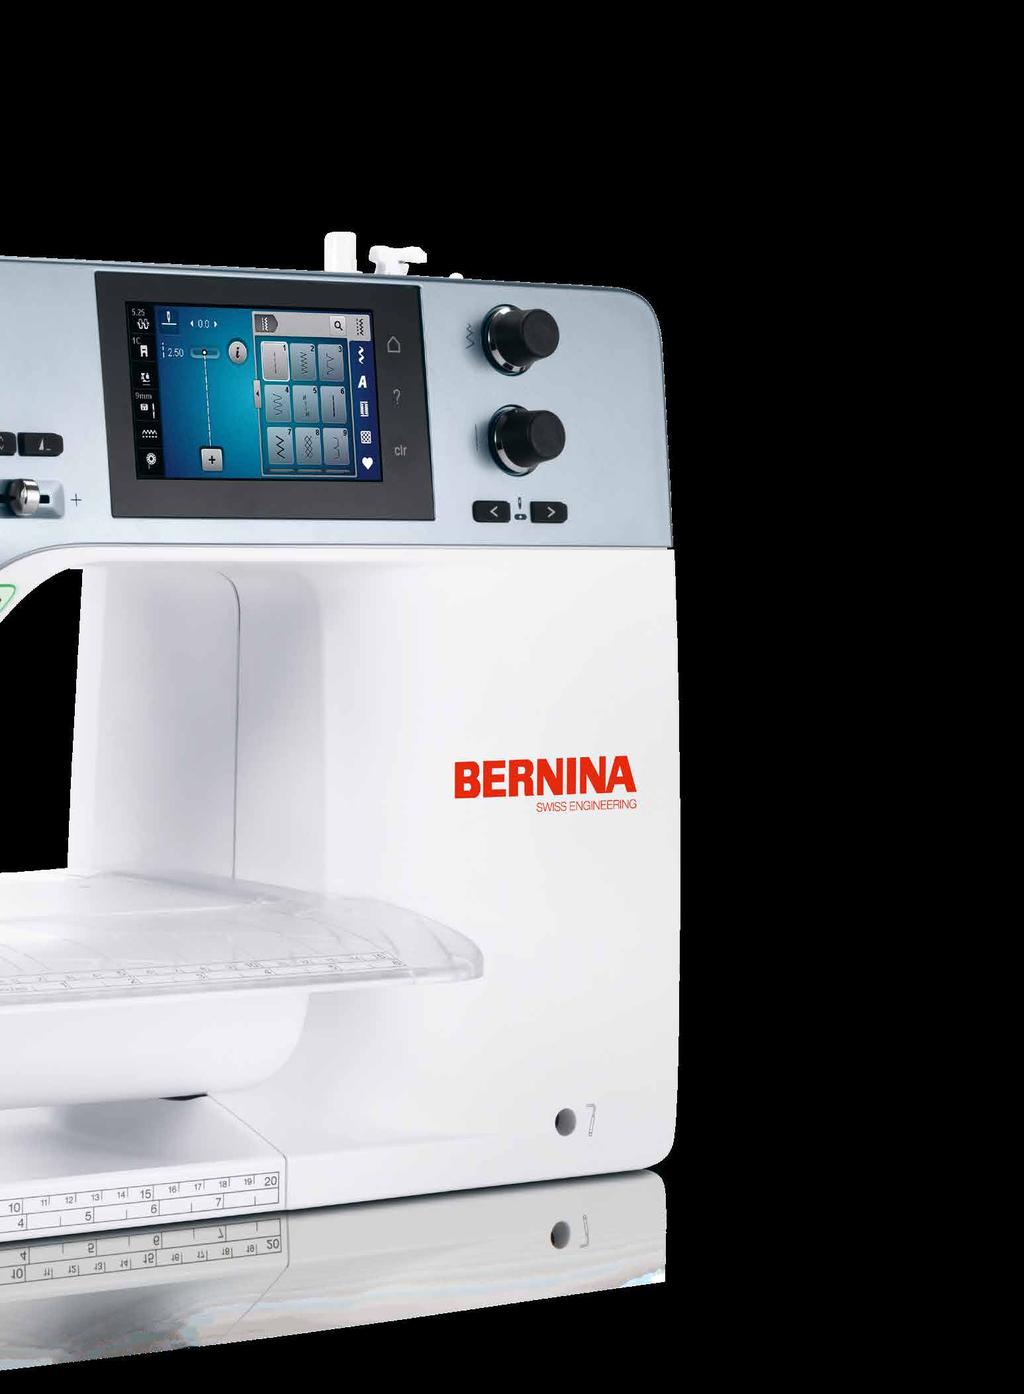 Variable Sewing Speed Adjust with the slide speed control Maximum speed of 900 stitches per minute Modern, Color Touch Screen Easy to view thanks to central position Easy to use with simple